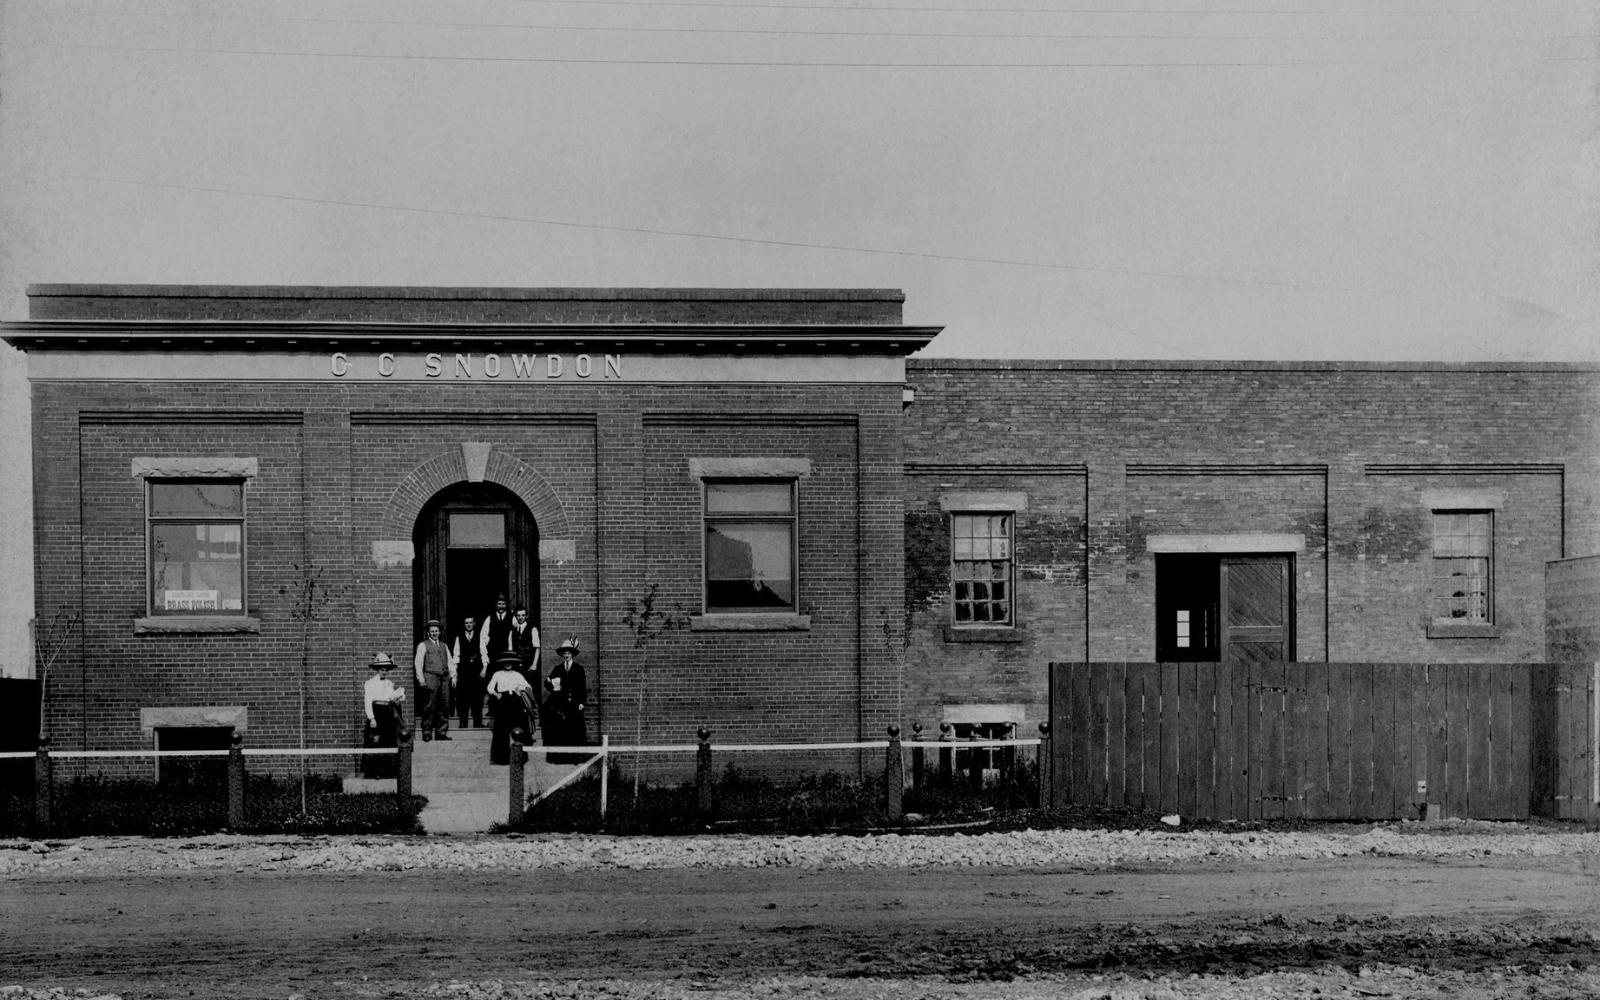 An historical photo of the outside of the c.c. snowdon building Calgary Heritage Roasting Companies coffee shop located in Calgary 